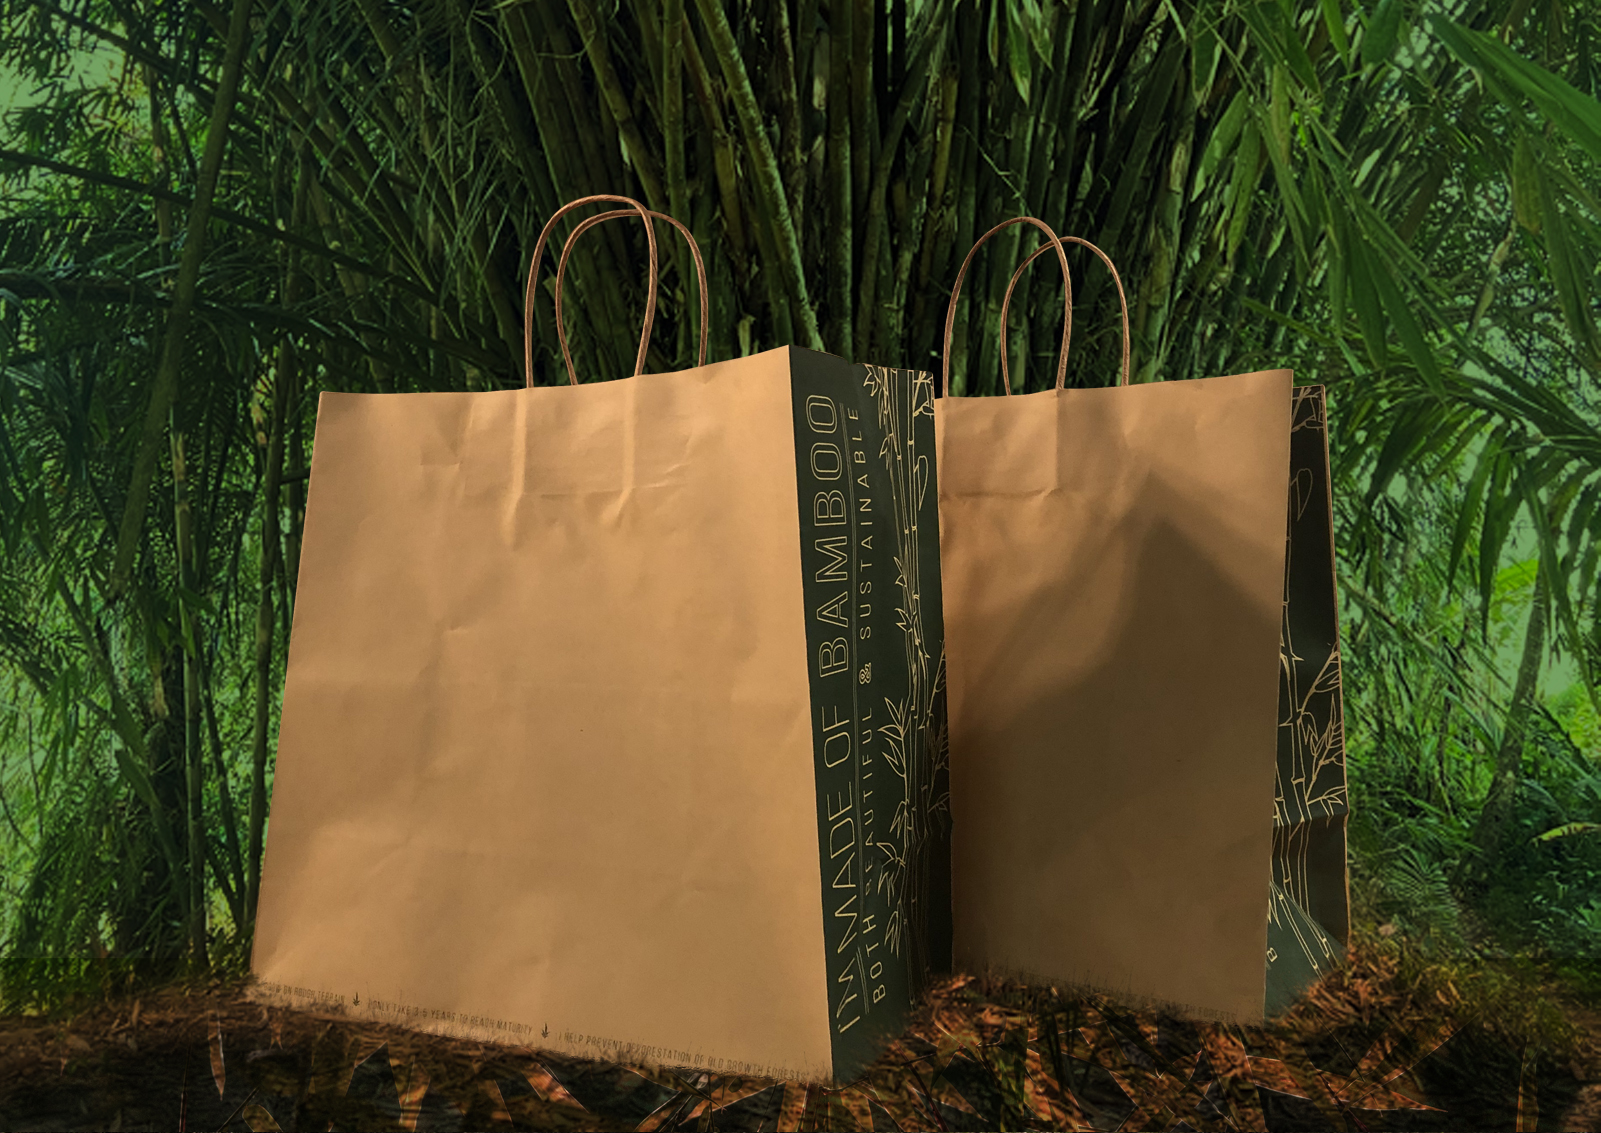 Bamboo Check out shopping bags with handles